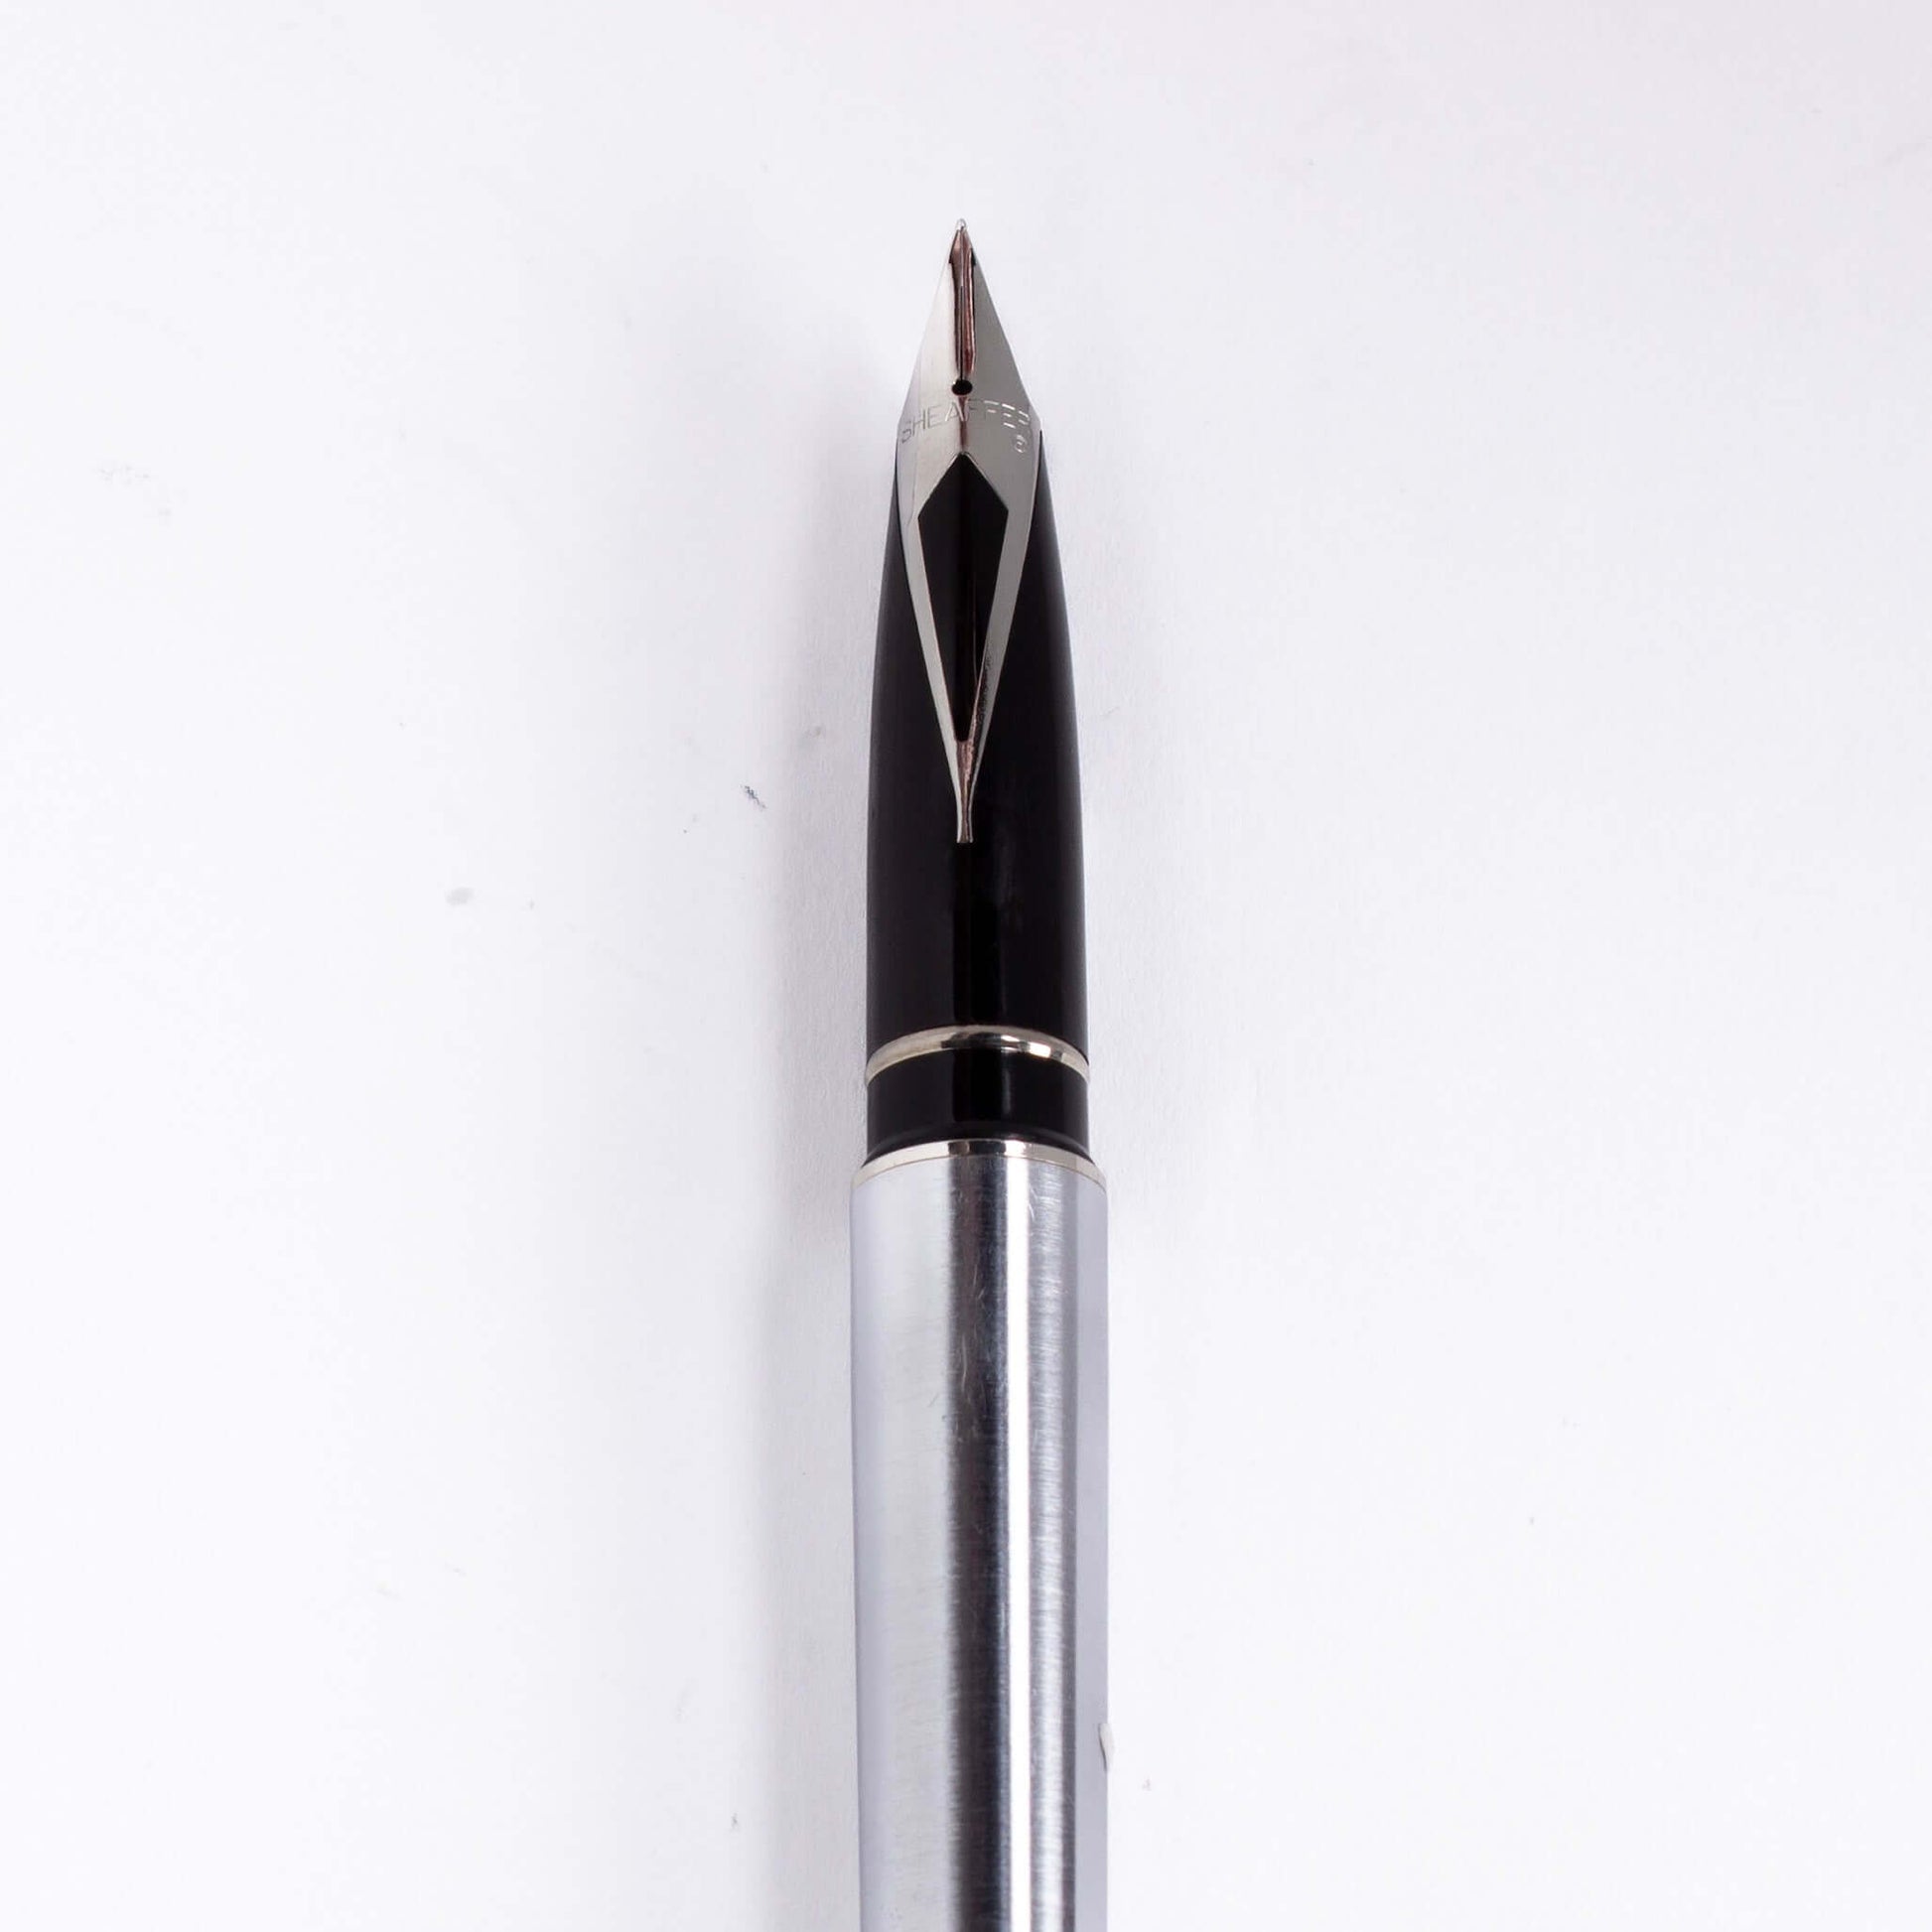 ${titleName/Type: Sheaffer Targa Manufacture Year: 1980's Length: 5 5/16 Filling System: Sheaffer Cartridges or Converter Color/Pattern: Brushed Chrome Nib Type/Condition and remarks: Fine Steel nib Condition: ﻿Excellent condition, no dents, dings, or cra